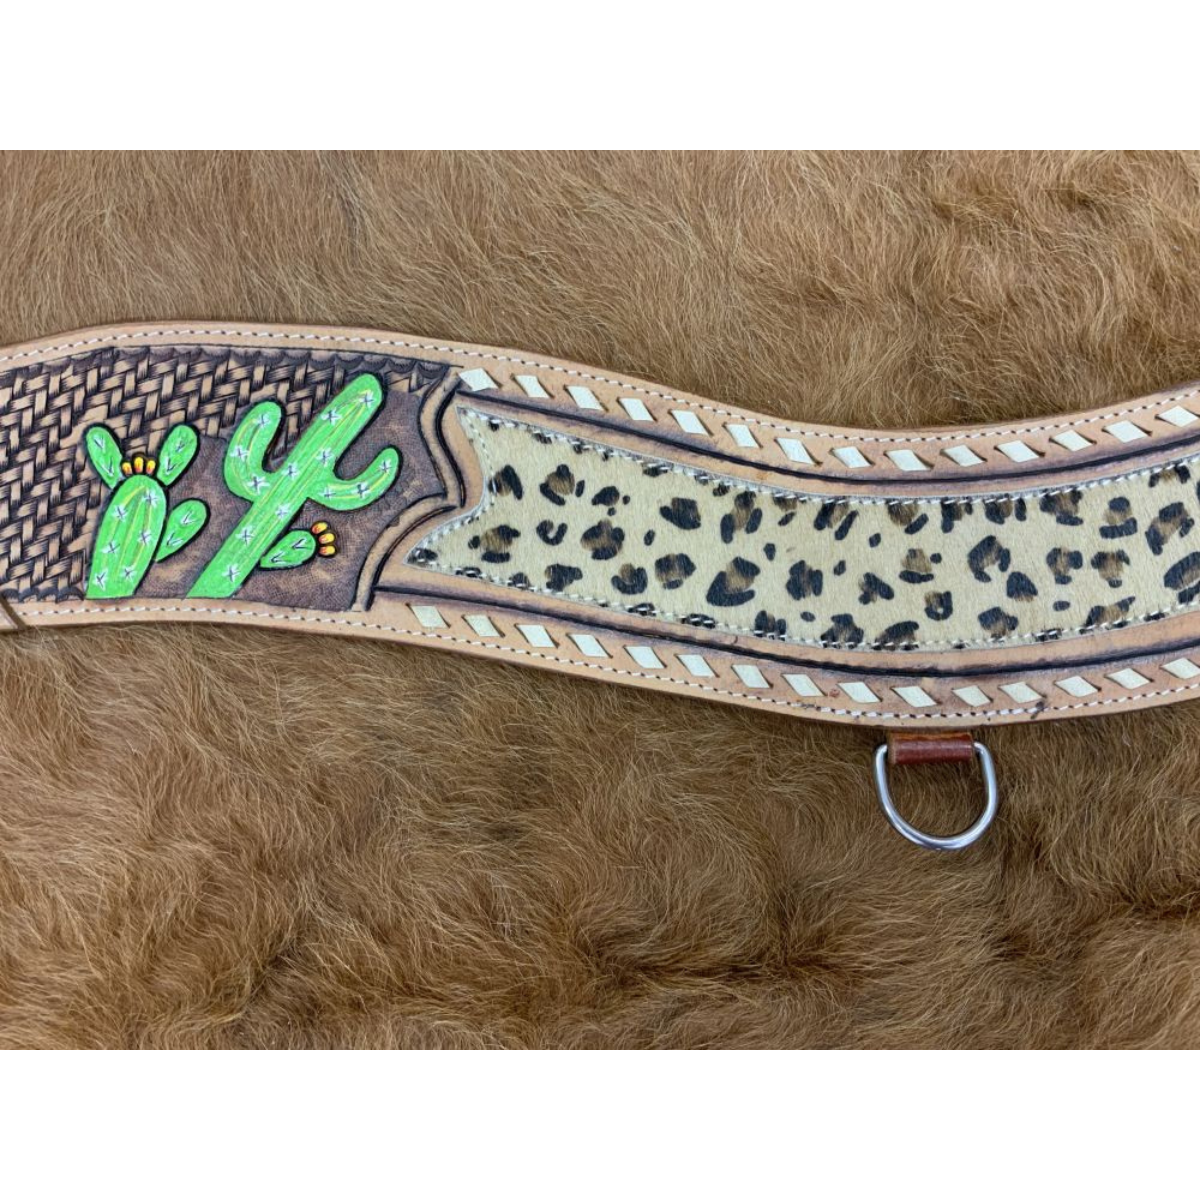 Showman ® Hand Painted Cactus tripping collar with Hair on Cheetah Inlay. - Double T Saddles